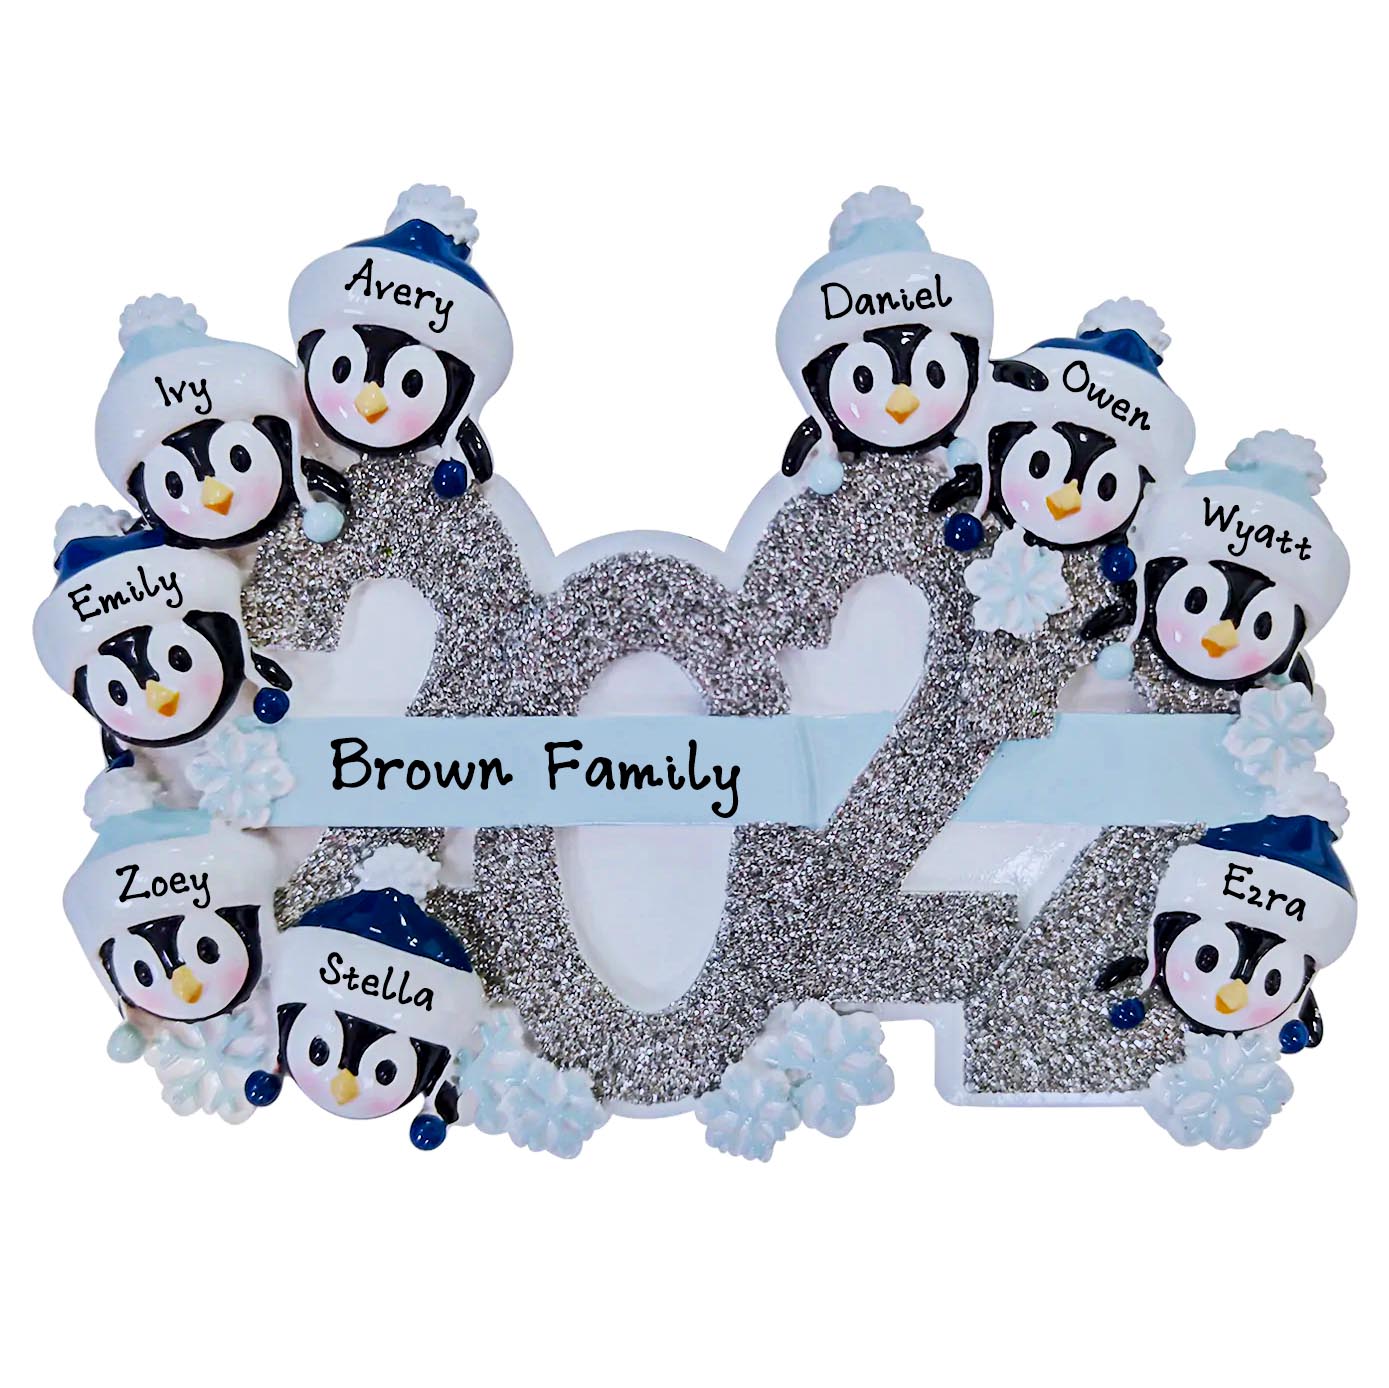 Personalized Family Christmas Ornament (Family of 9)